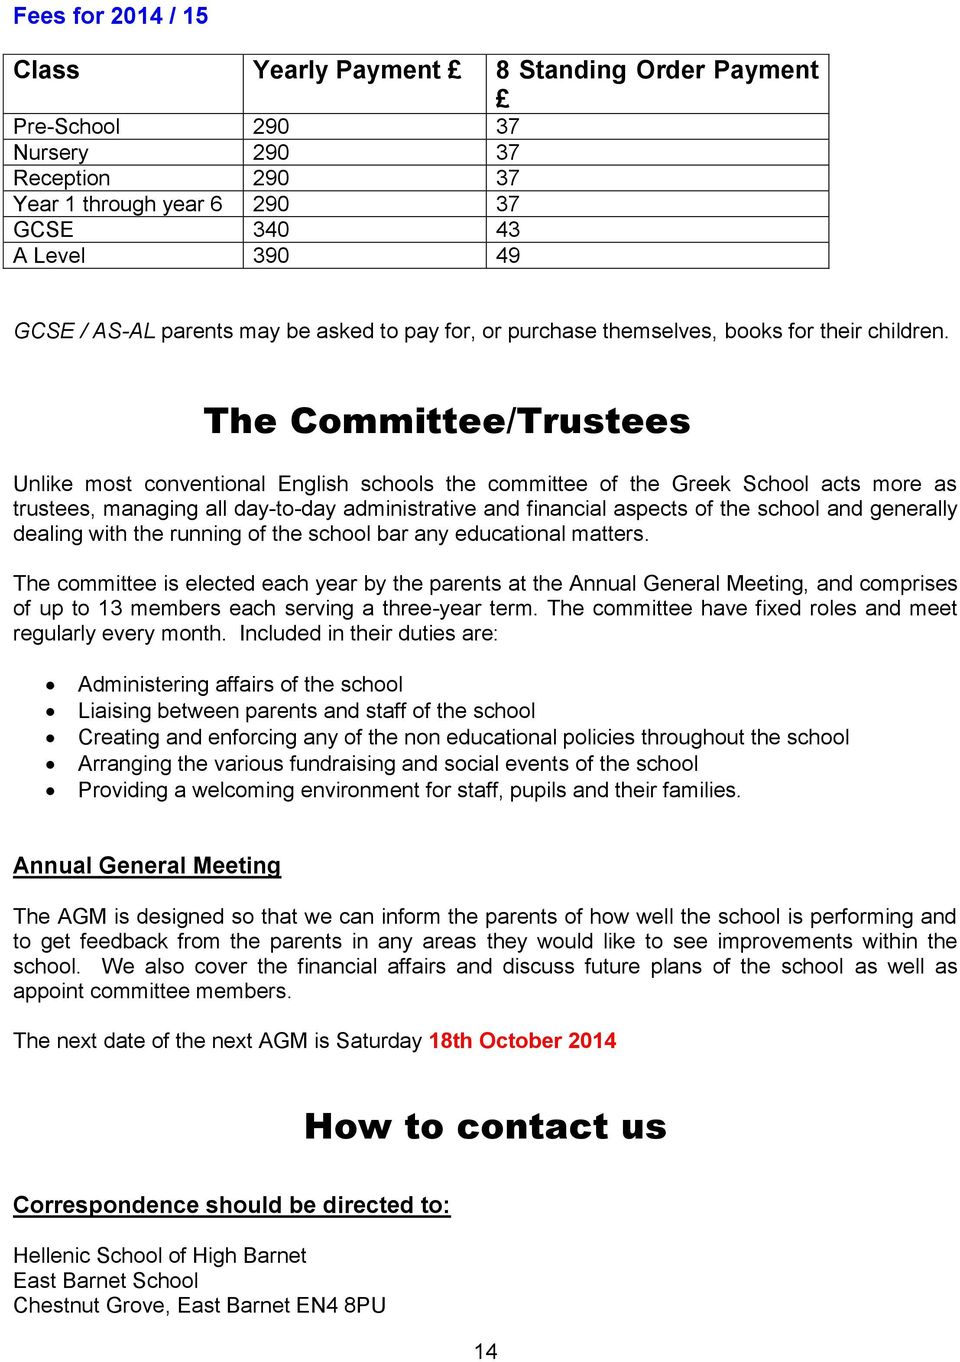 The Committee/Trustees Unlike most conventional English schools the committee of the Greek School acts more as trustees, managing all day-to-day administrative and financial aspects of the school and